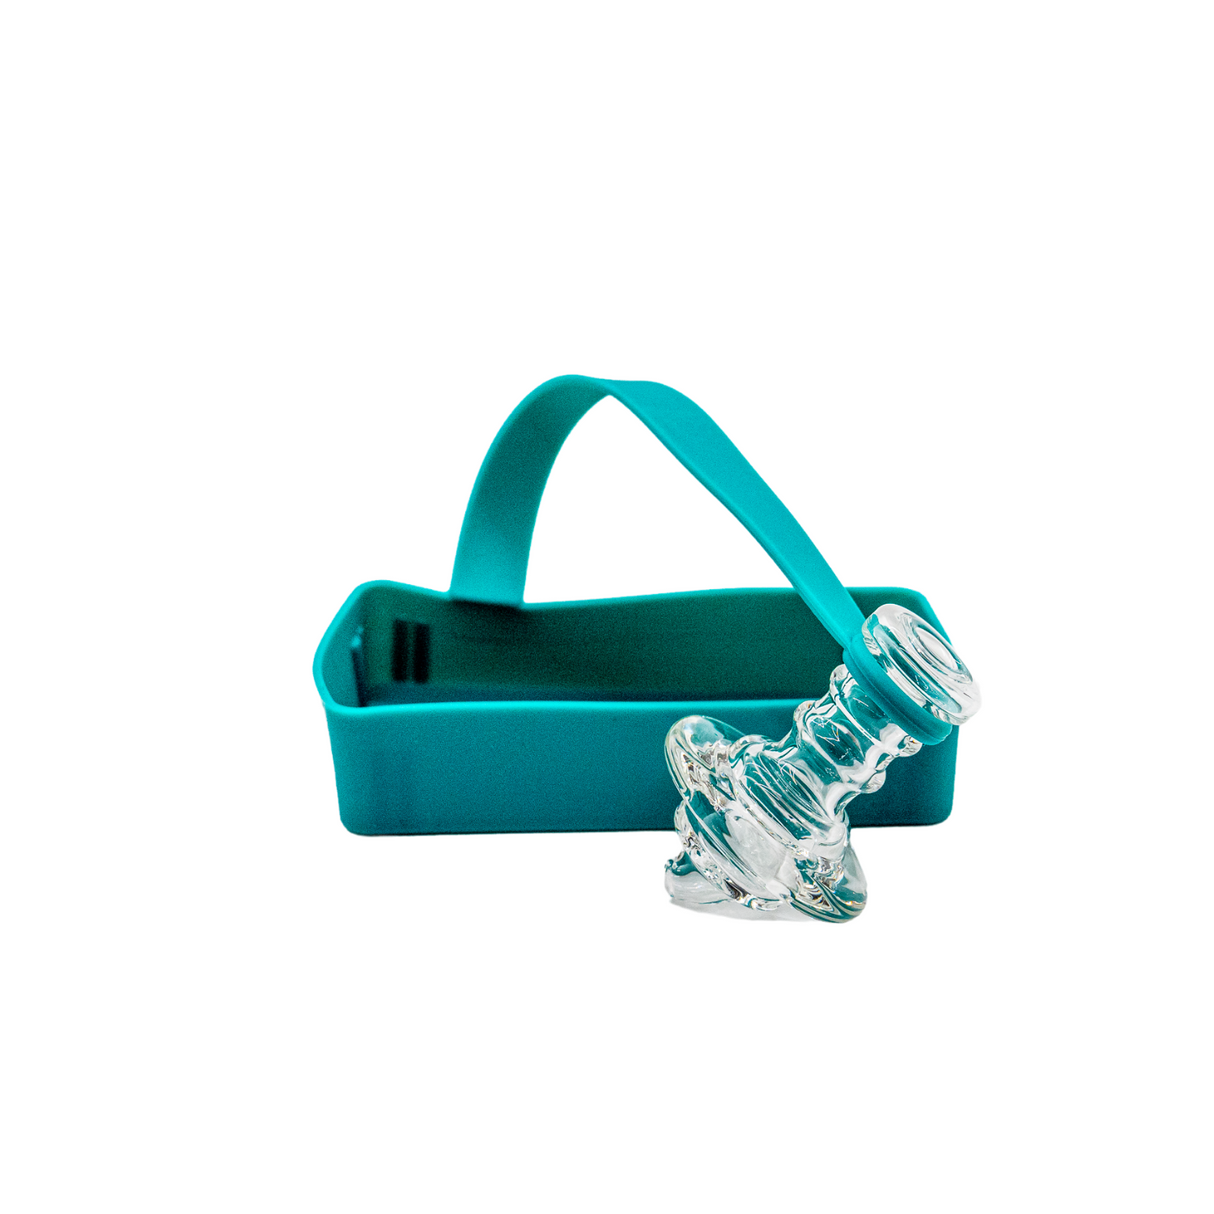 RiO Tethered Silicone Sleeve in teal, front view, with clear glass attachment for secure handling